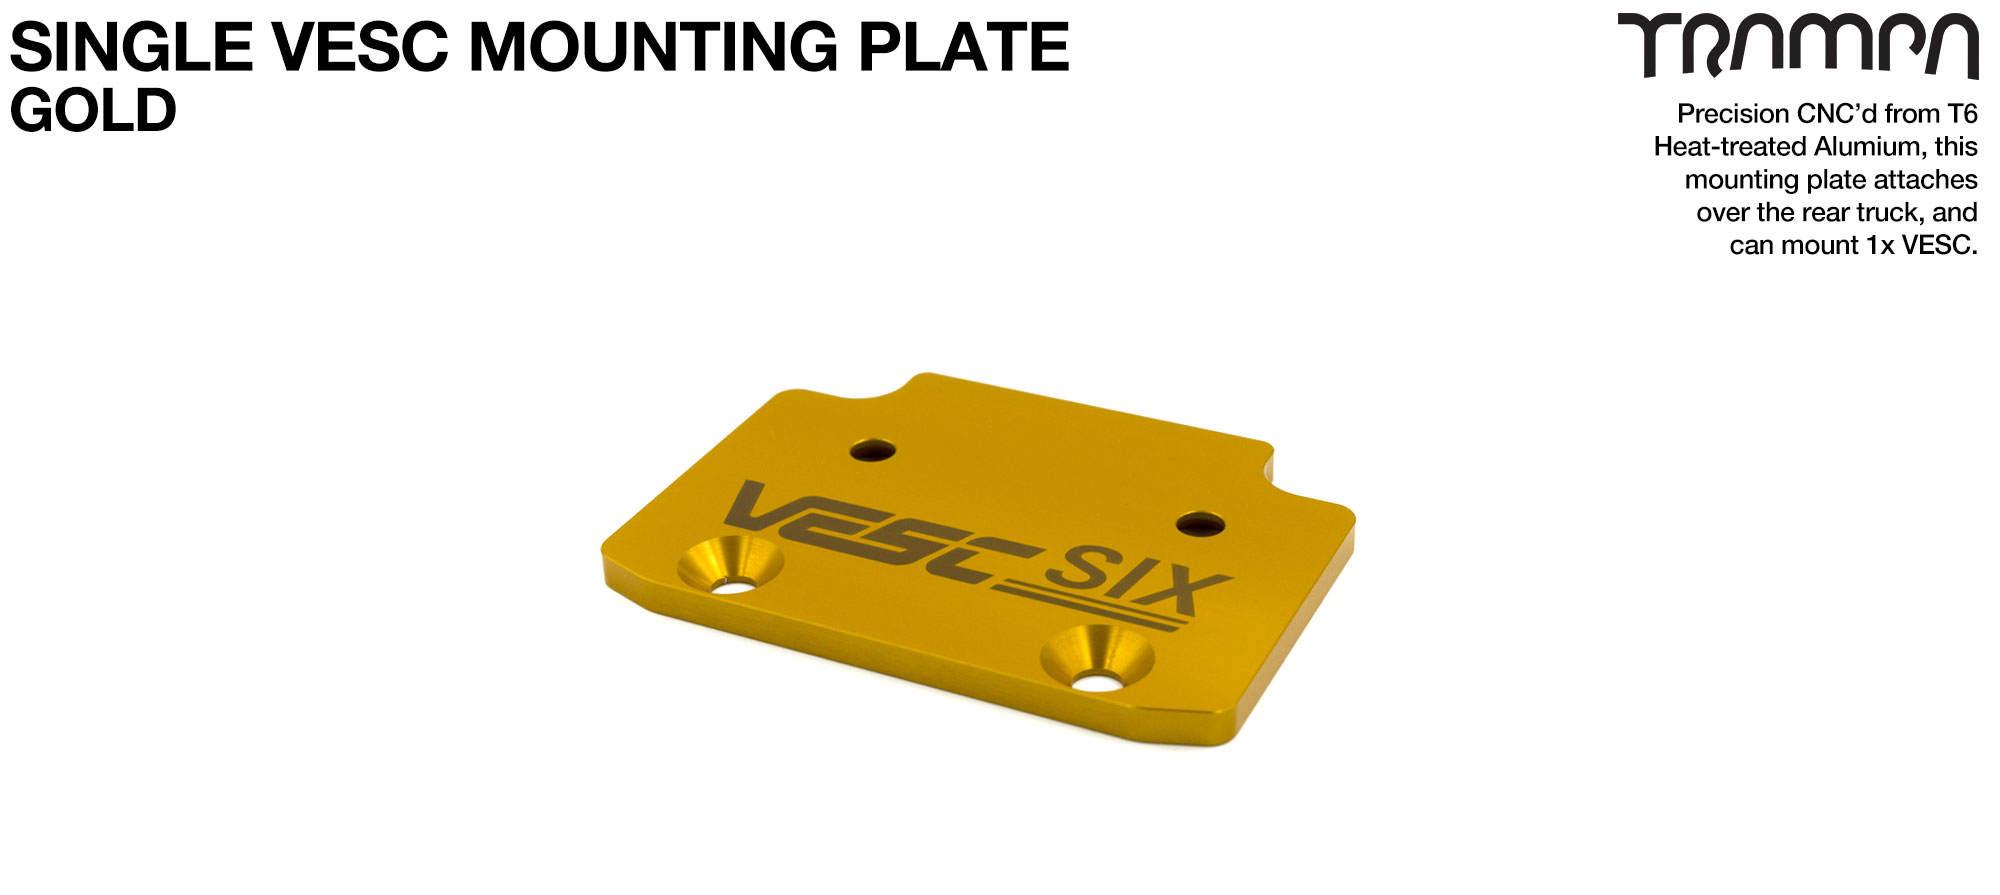 ALUMINIUM Mounting Plate for 1x VESC 6 & Fixing Bolts - GOLD 